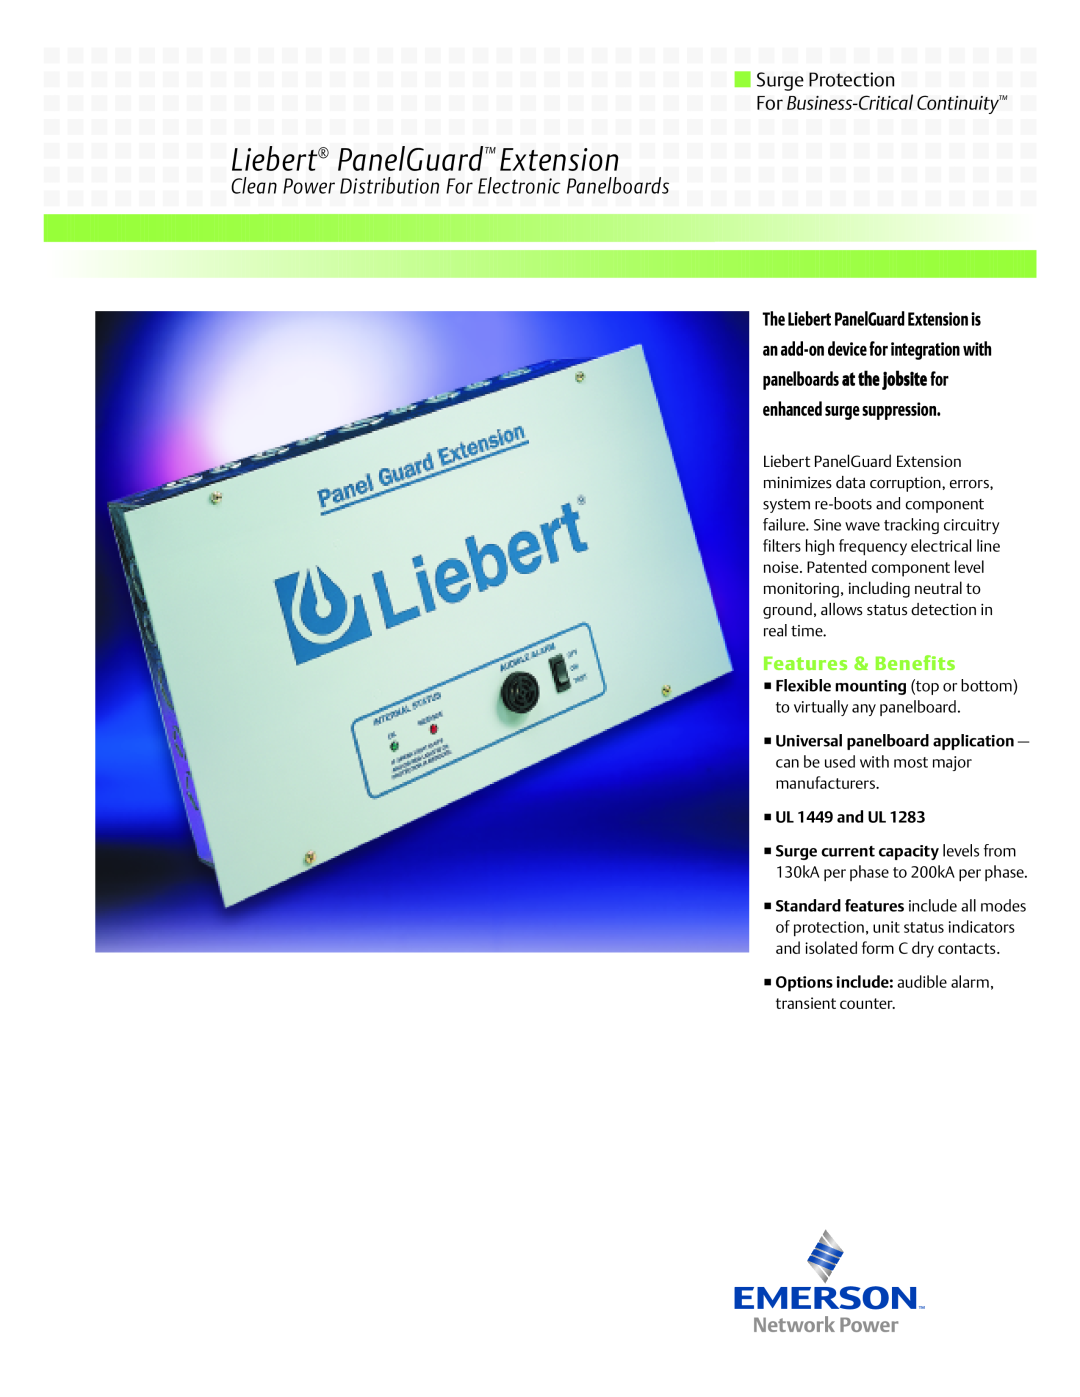 Emerson 65 manual Clean Power Distribution For Electronic Panelboards, Features & Benefits, UL 1449 and UL 